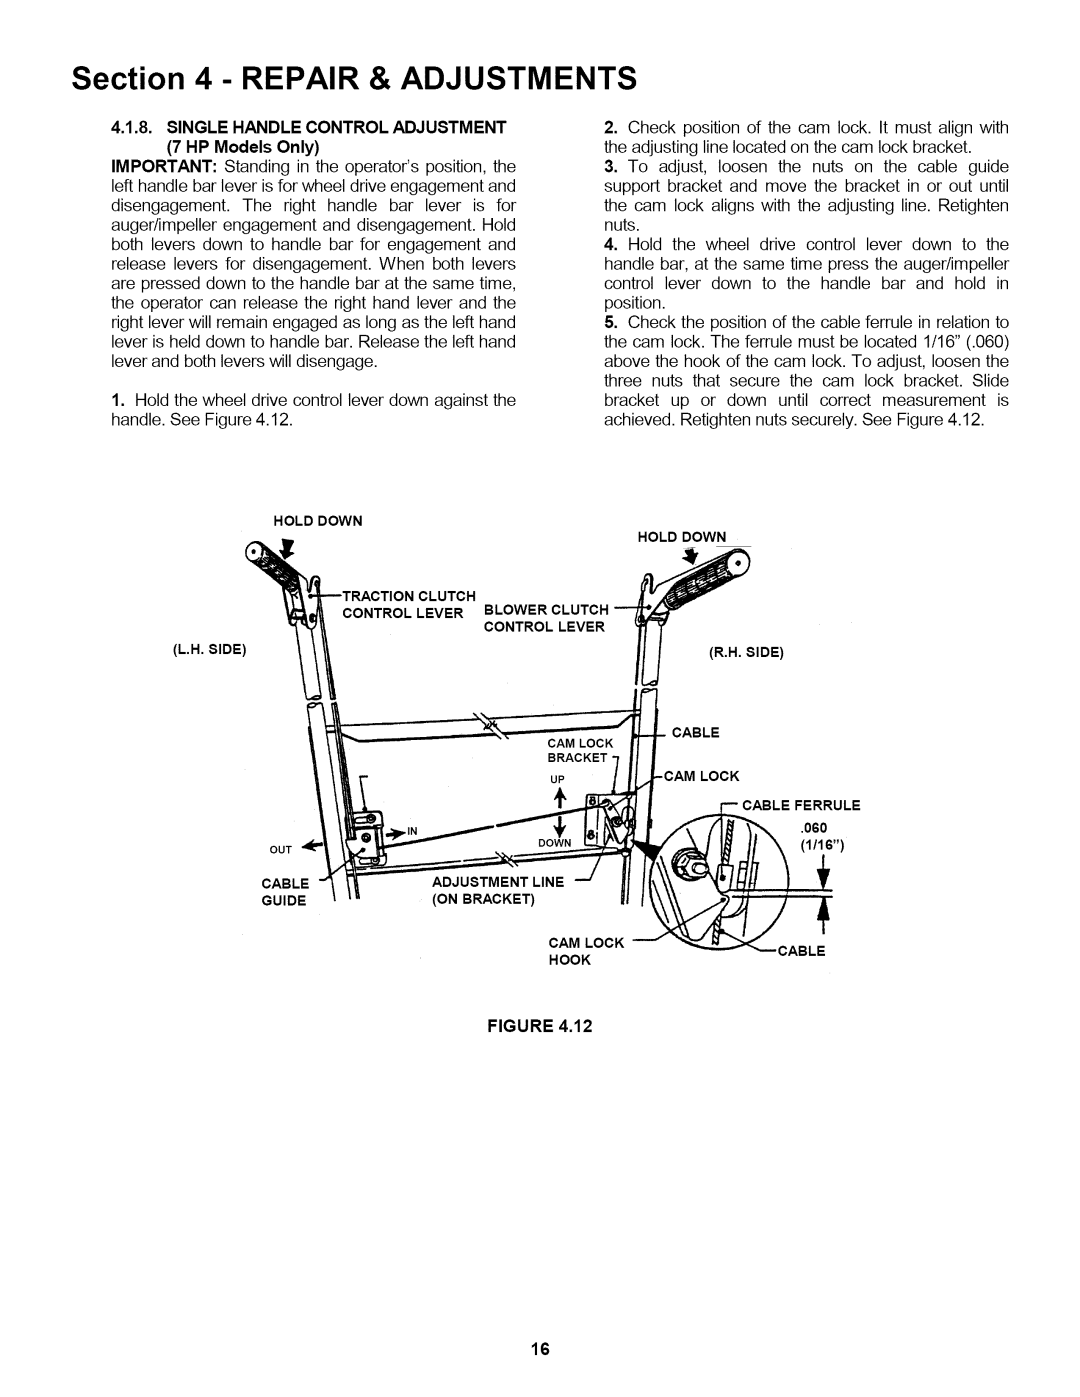 Snapper 155223 important safety instructions Repair & Adjustments, Blowerclutch 